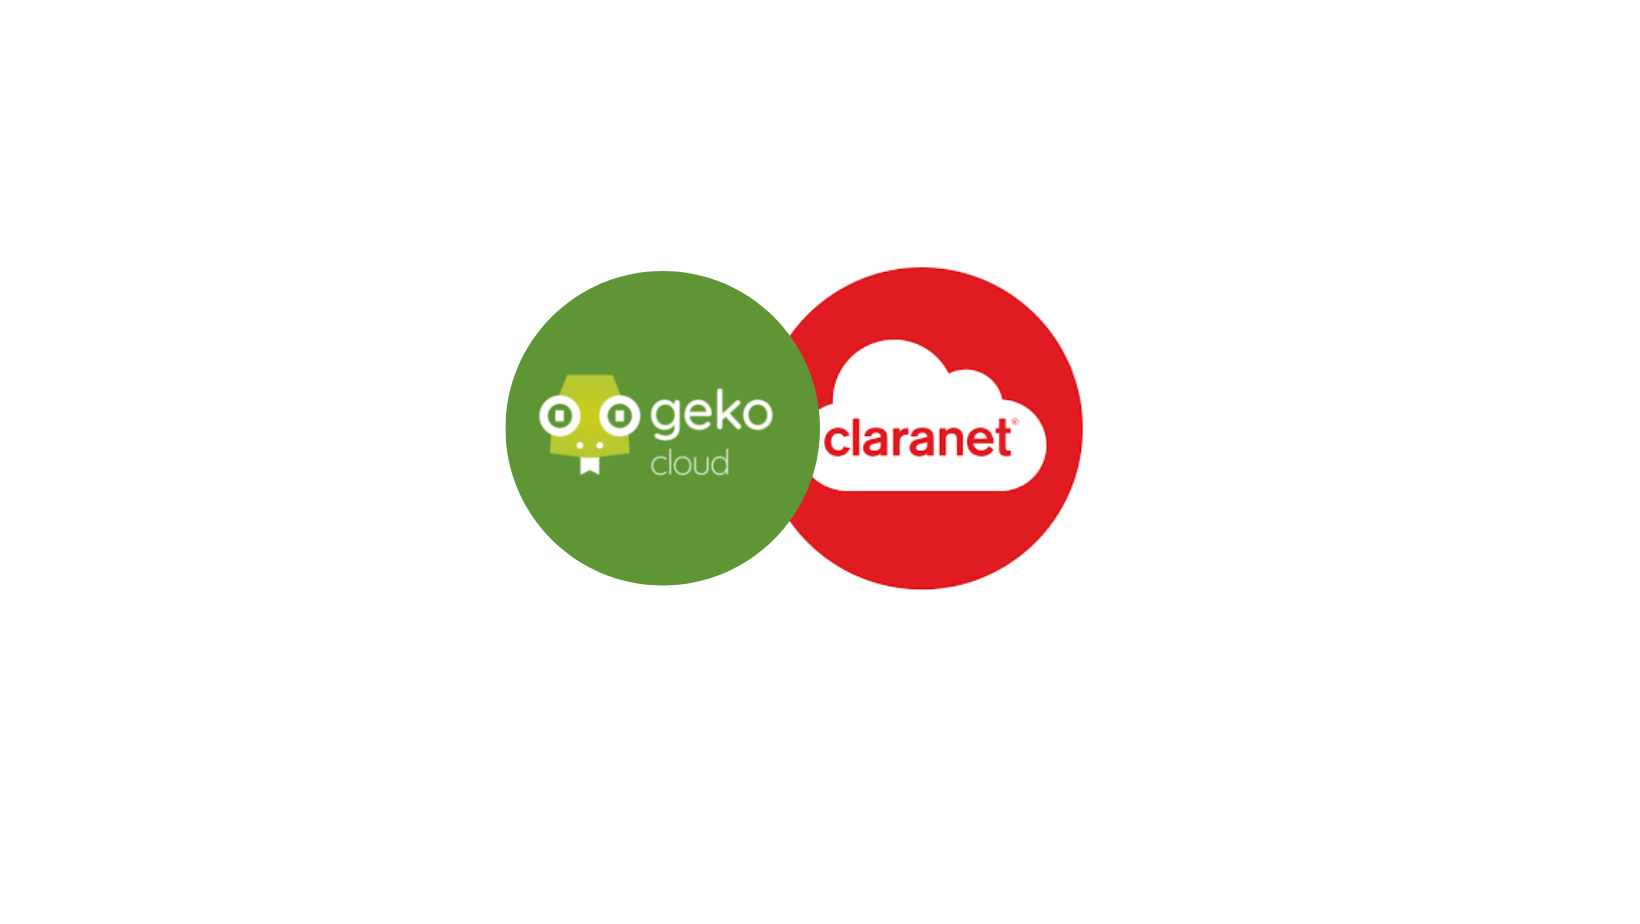 Geko Cloud grows and joins the Claranet group